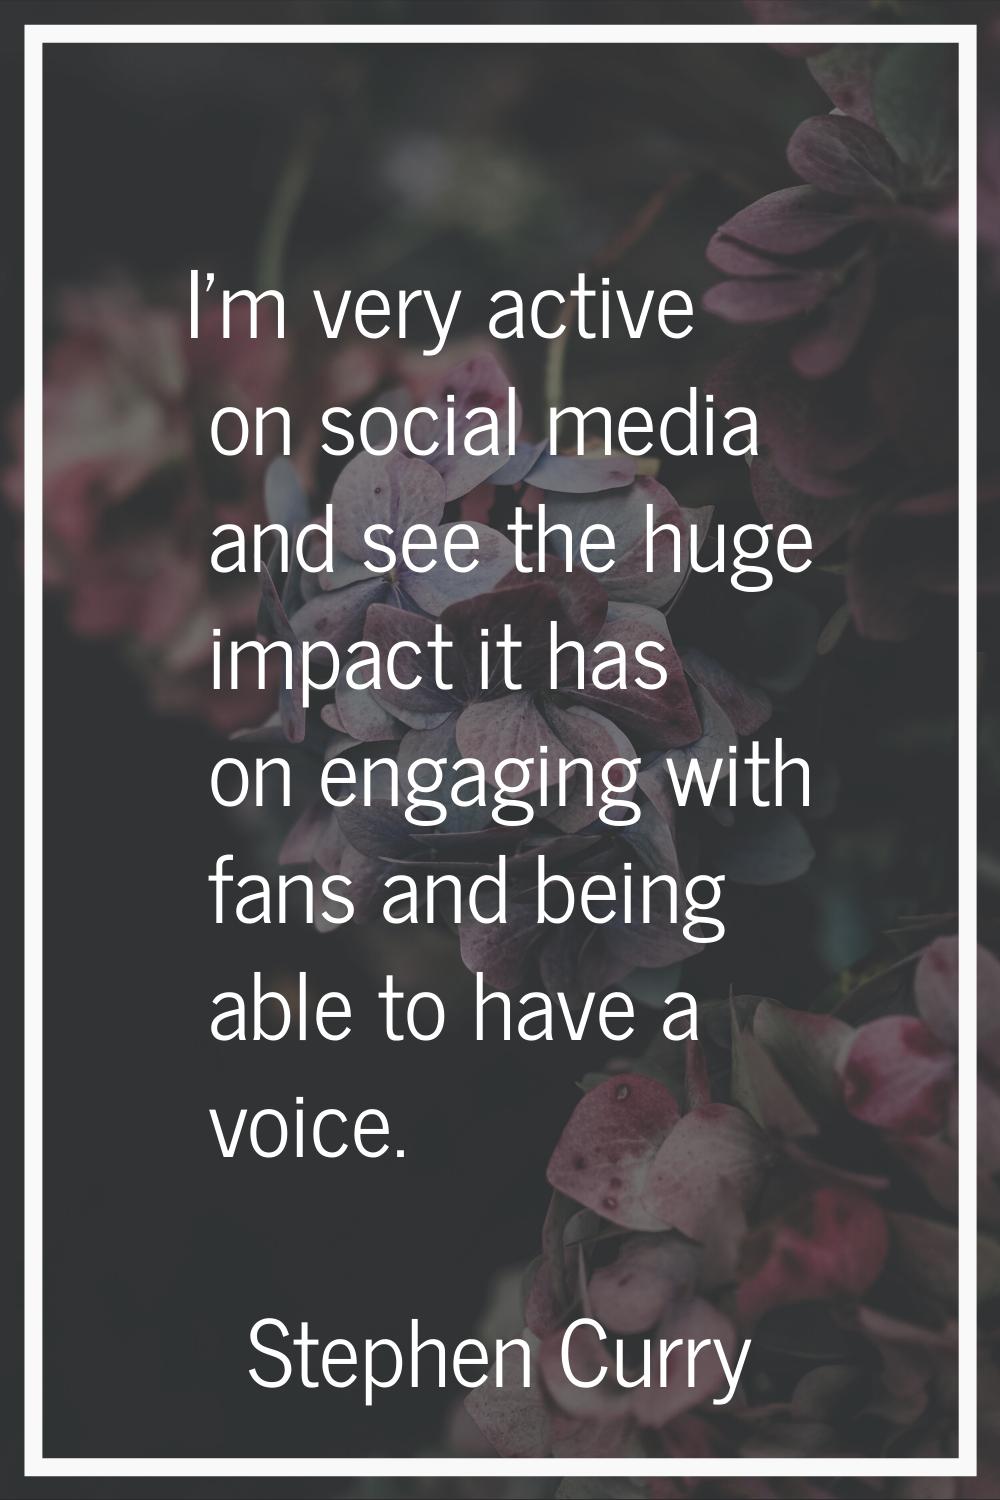 I'm very active on social media and see the huge impact it has on engaging with fans and being able